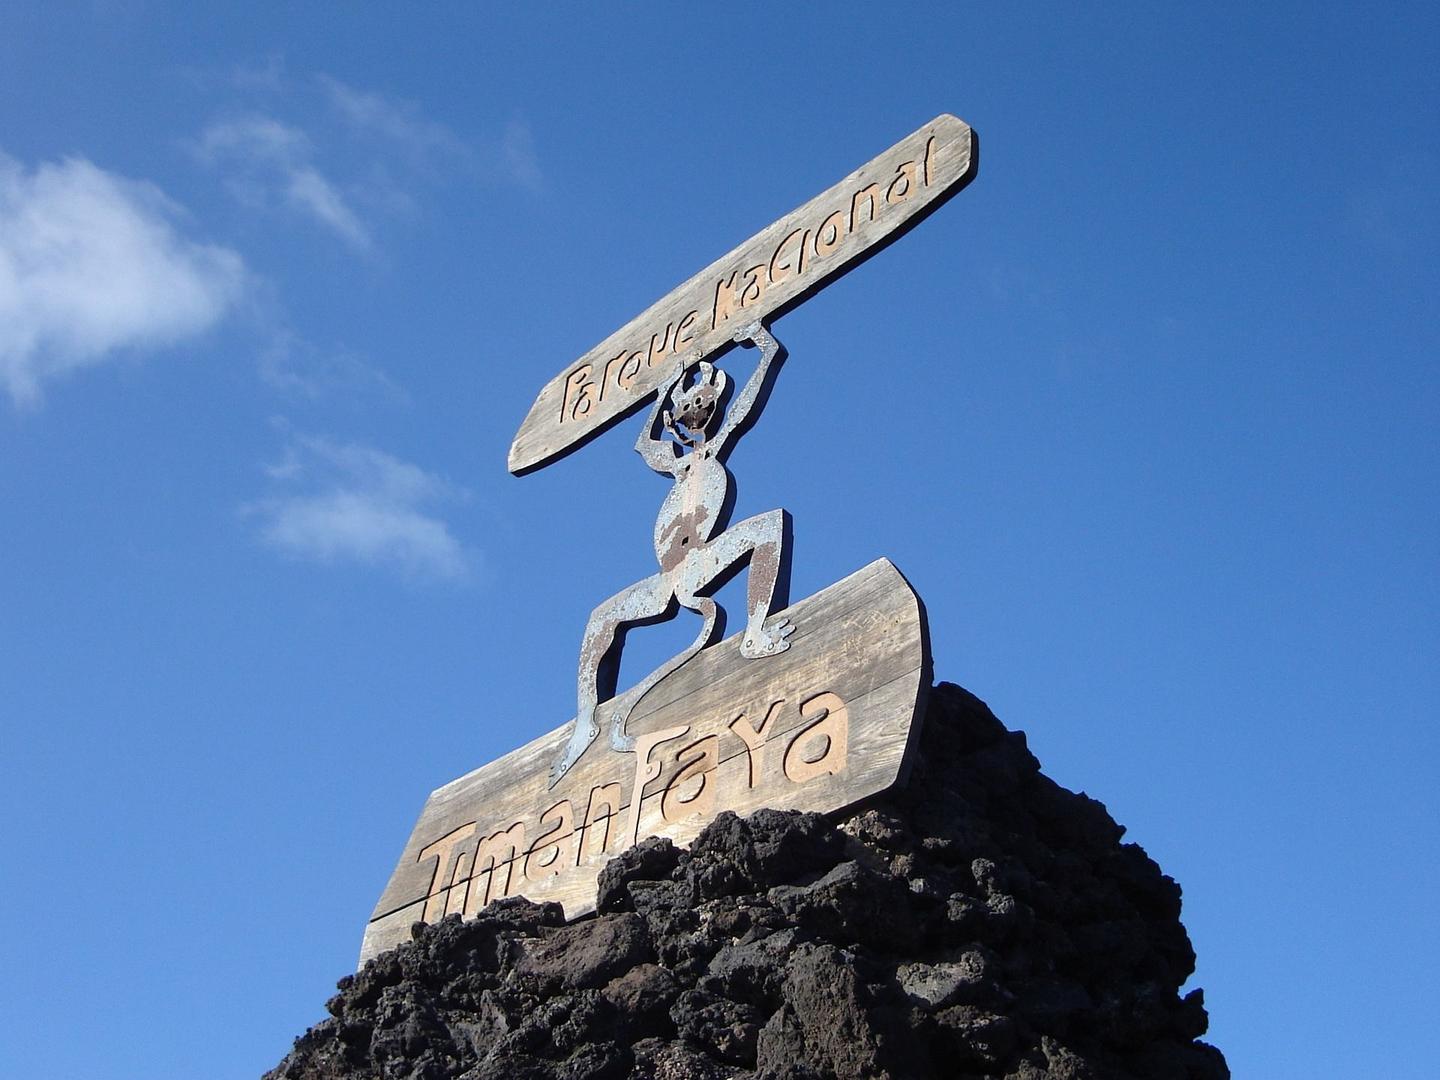 The iconic entrance sign of Timanfaya National Park in Lanzarote, featuring a stylized figure holding a board with the park's name, set against a clear blue sky.